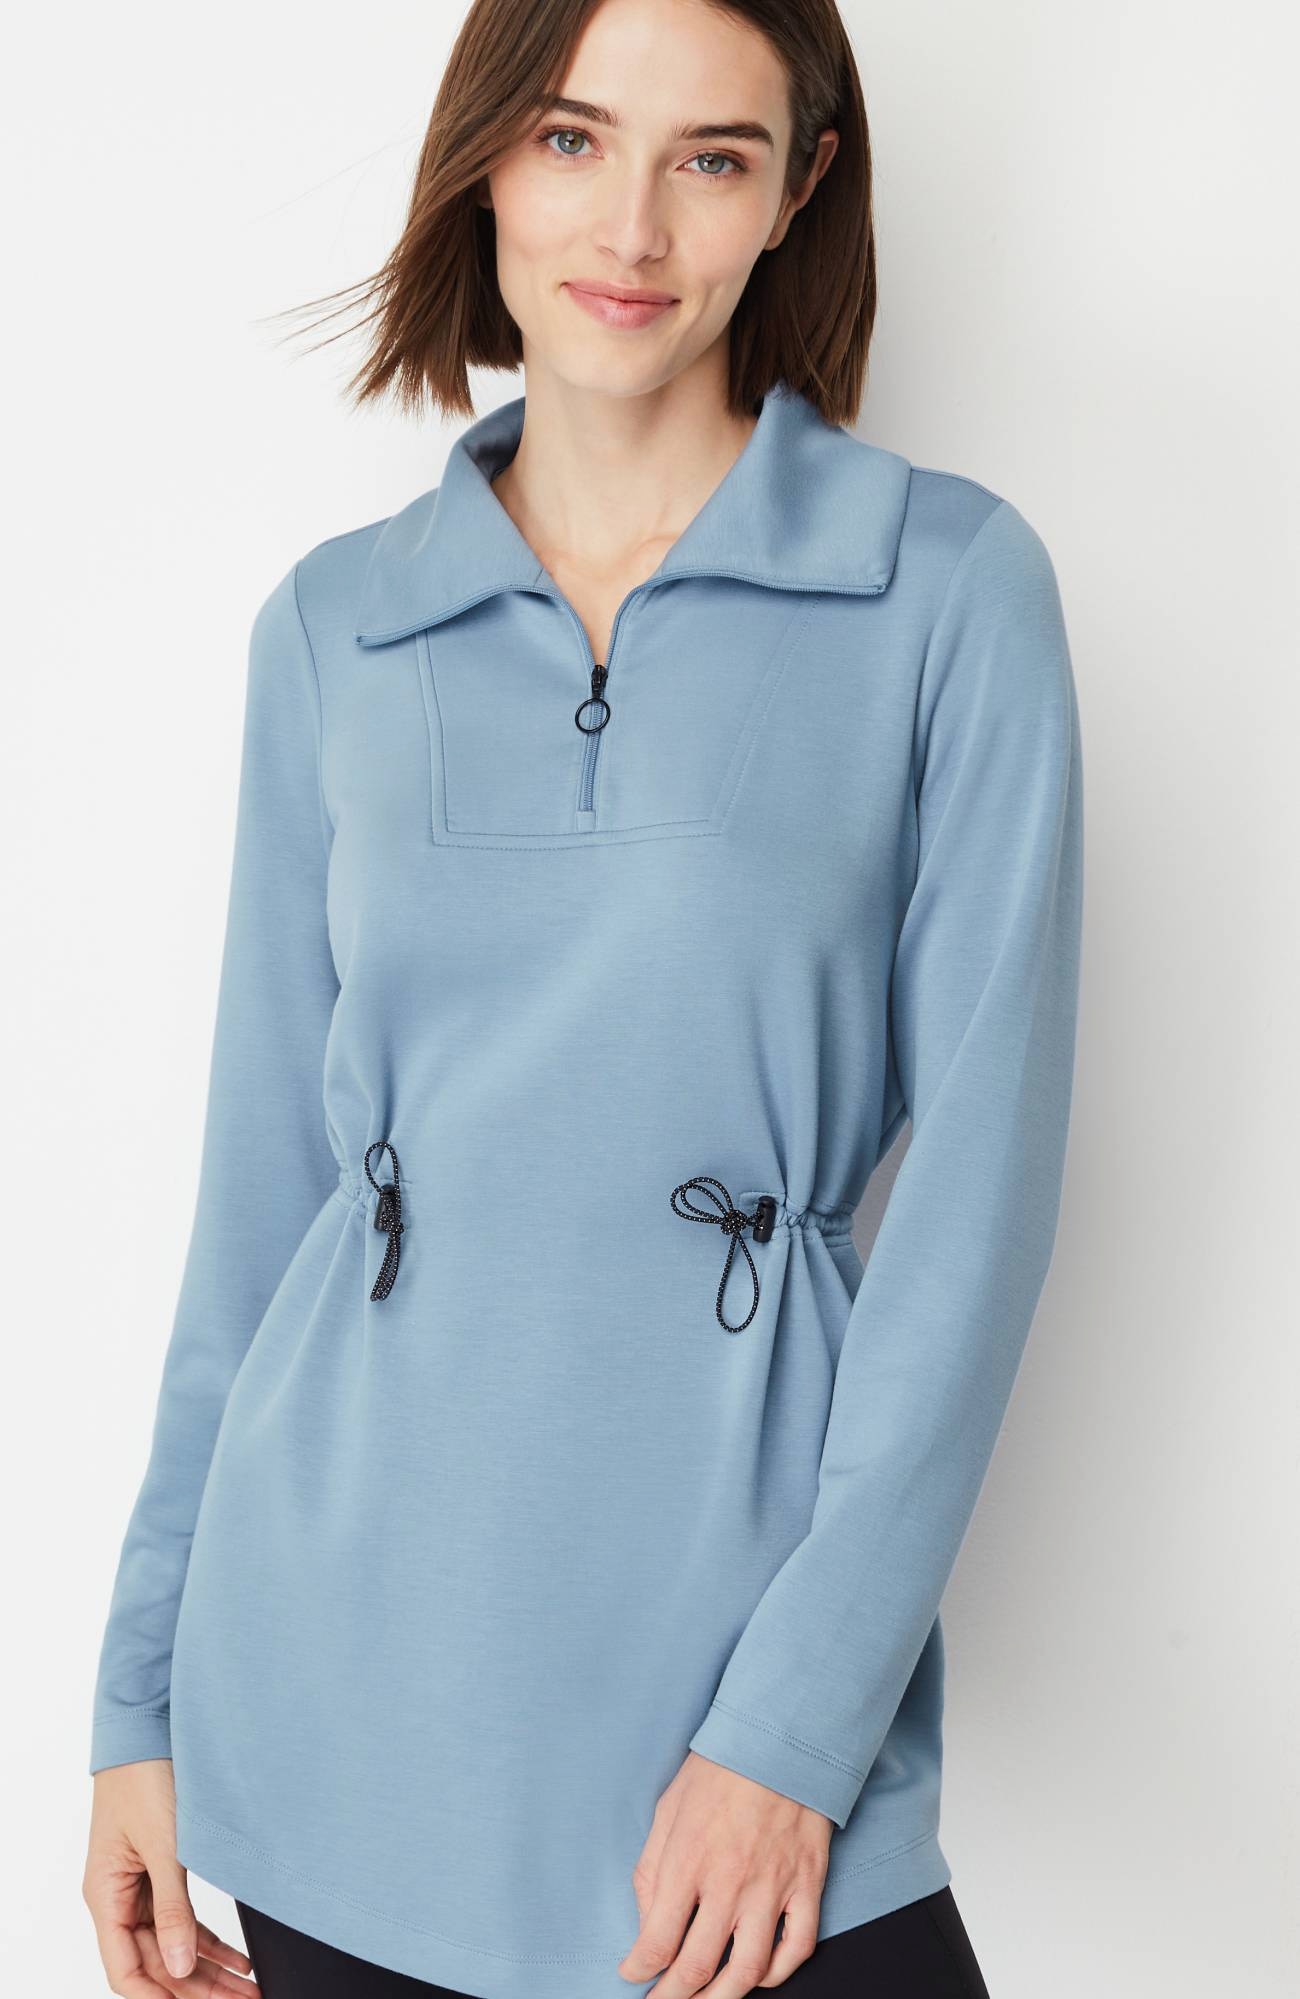 Fit Sleek Double-Knit Cinched-Waist Tunic